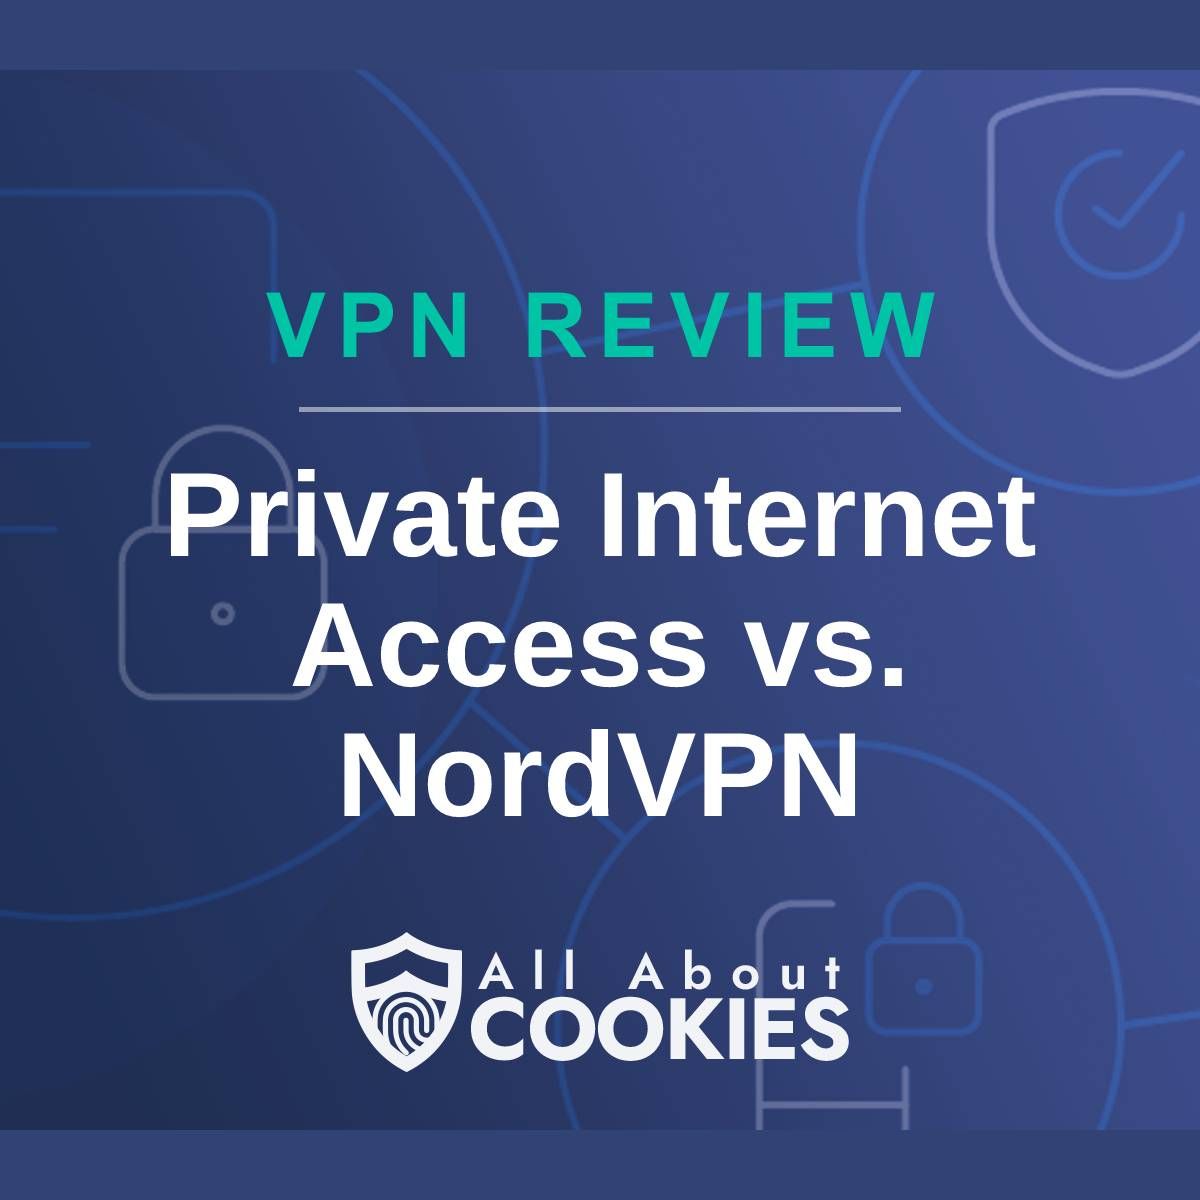 A blue background with images of locks and shields with the text &quot;VPN Review Private Internet Access vs. NordVPN&quot; and the All About Cookies logo. 